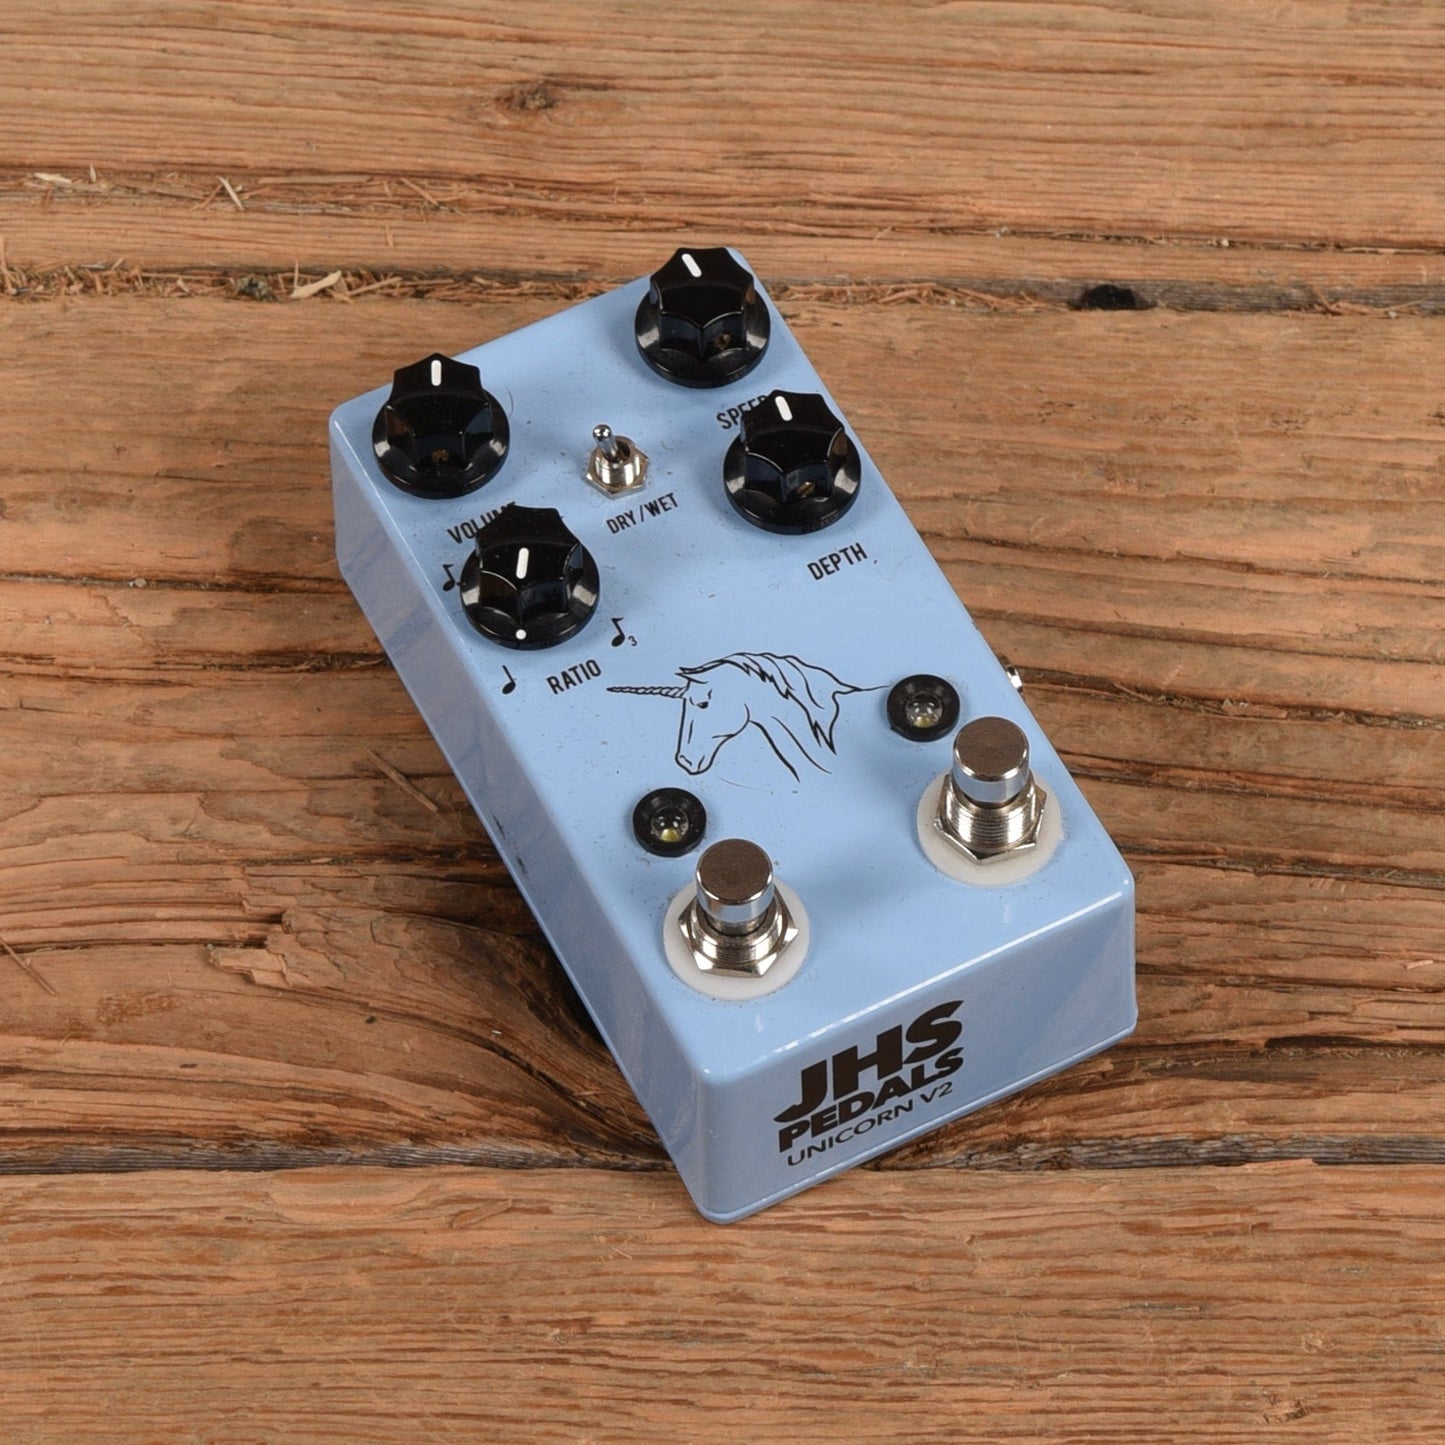 JHS Unicorn V2 Effects and Pedals / Phase Shifters